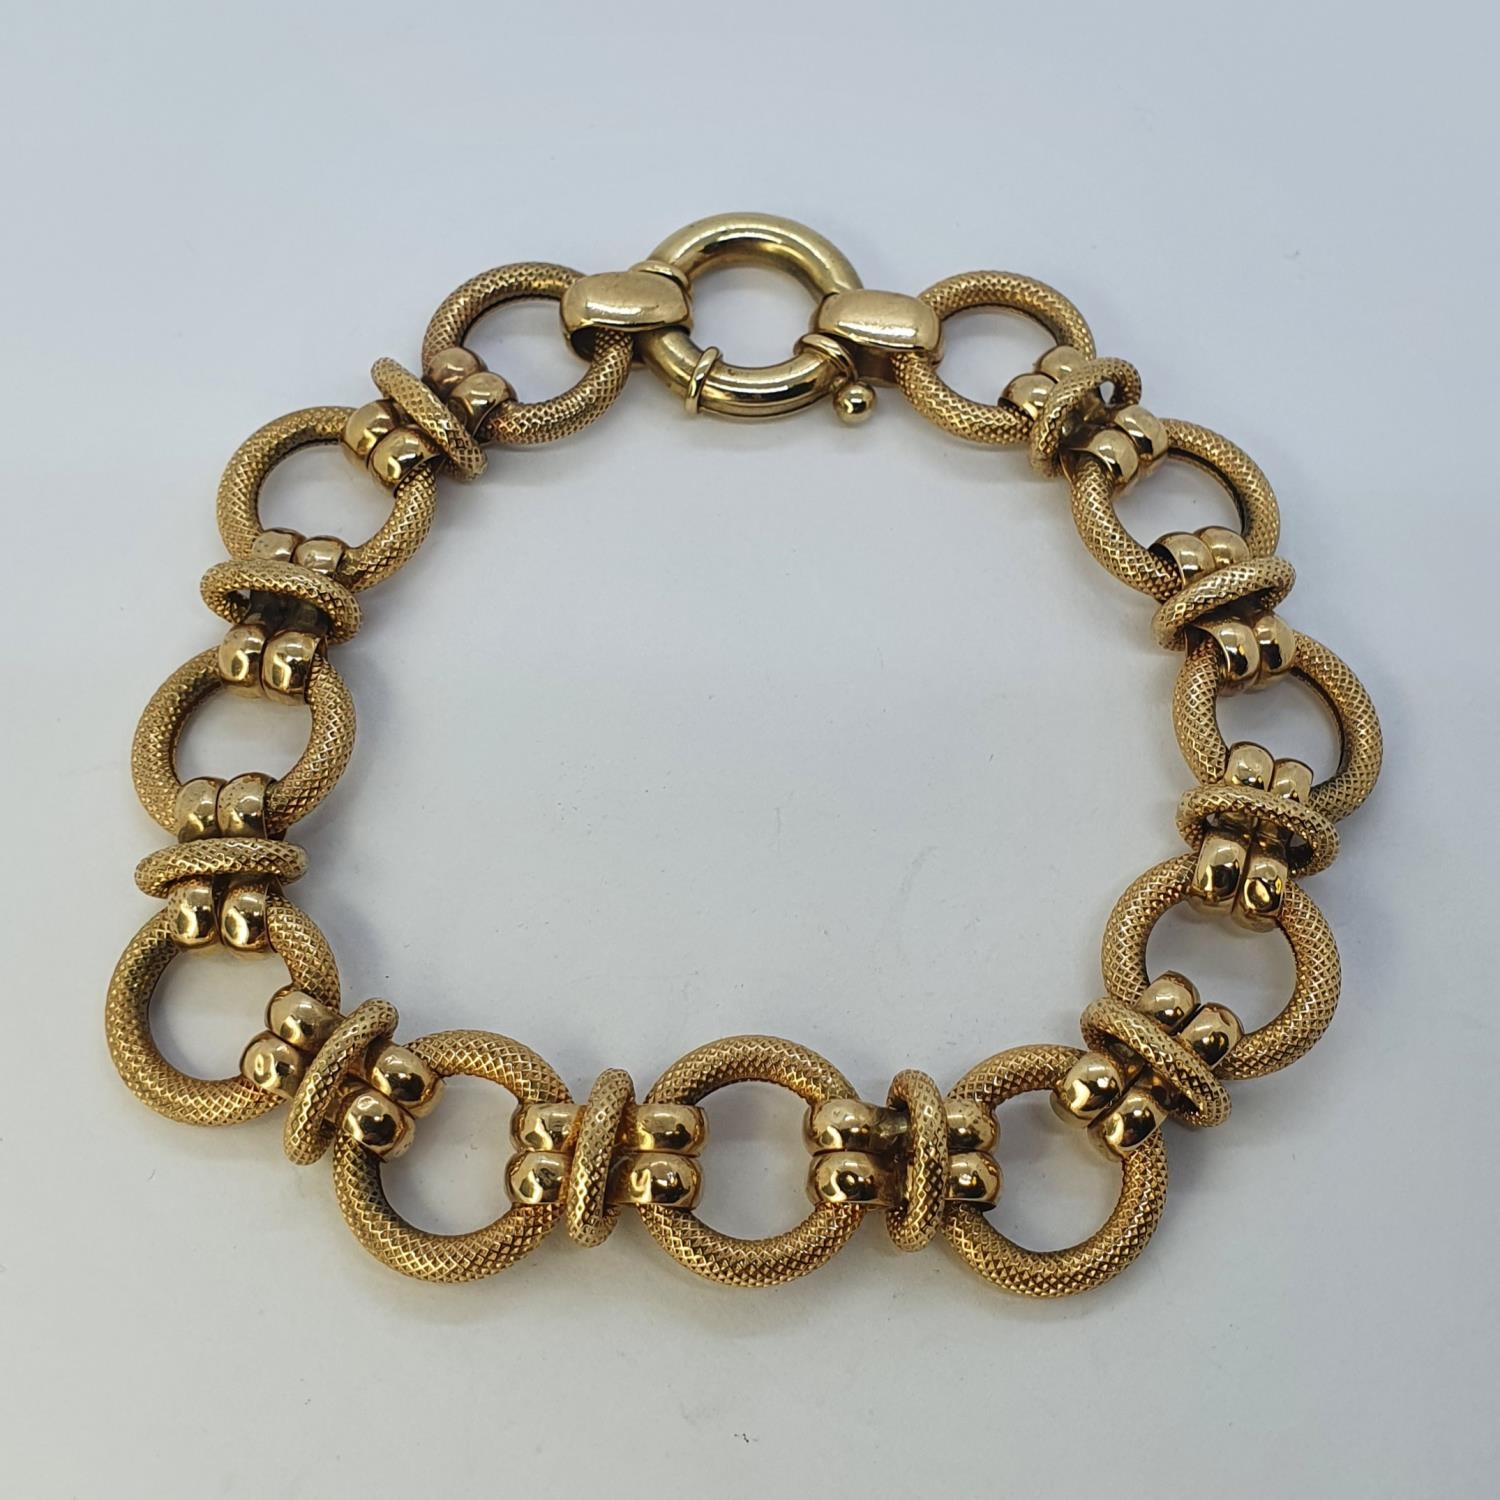 A 9ct gold ring link bracelet, 18.6g 20 cm long Overall condition good no major faults found, - Image 3 of 4